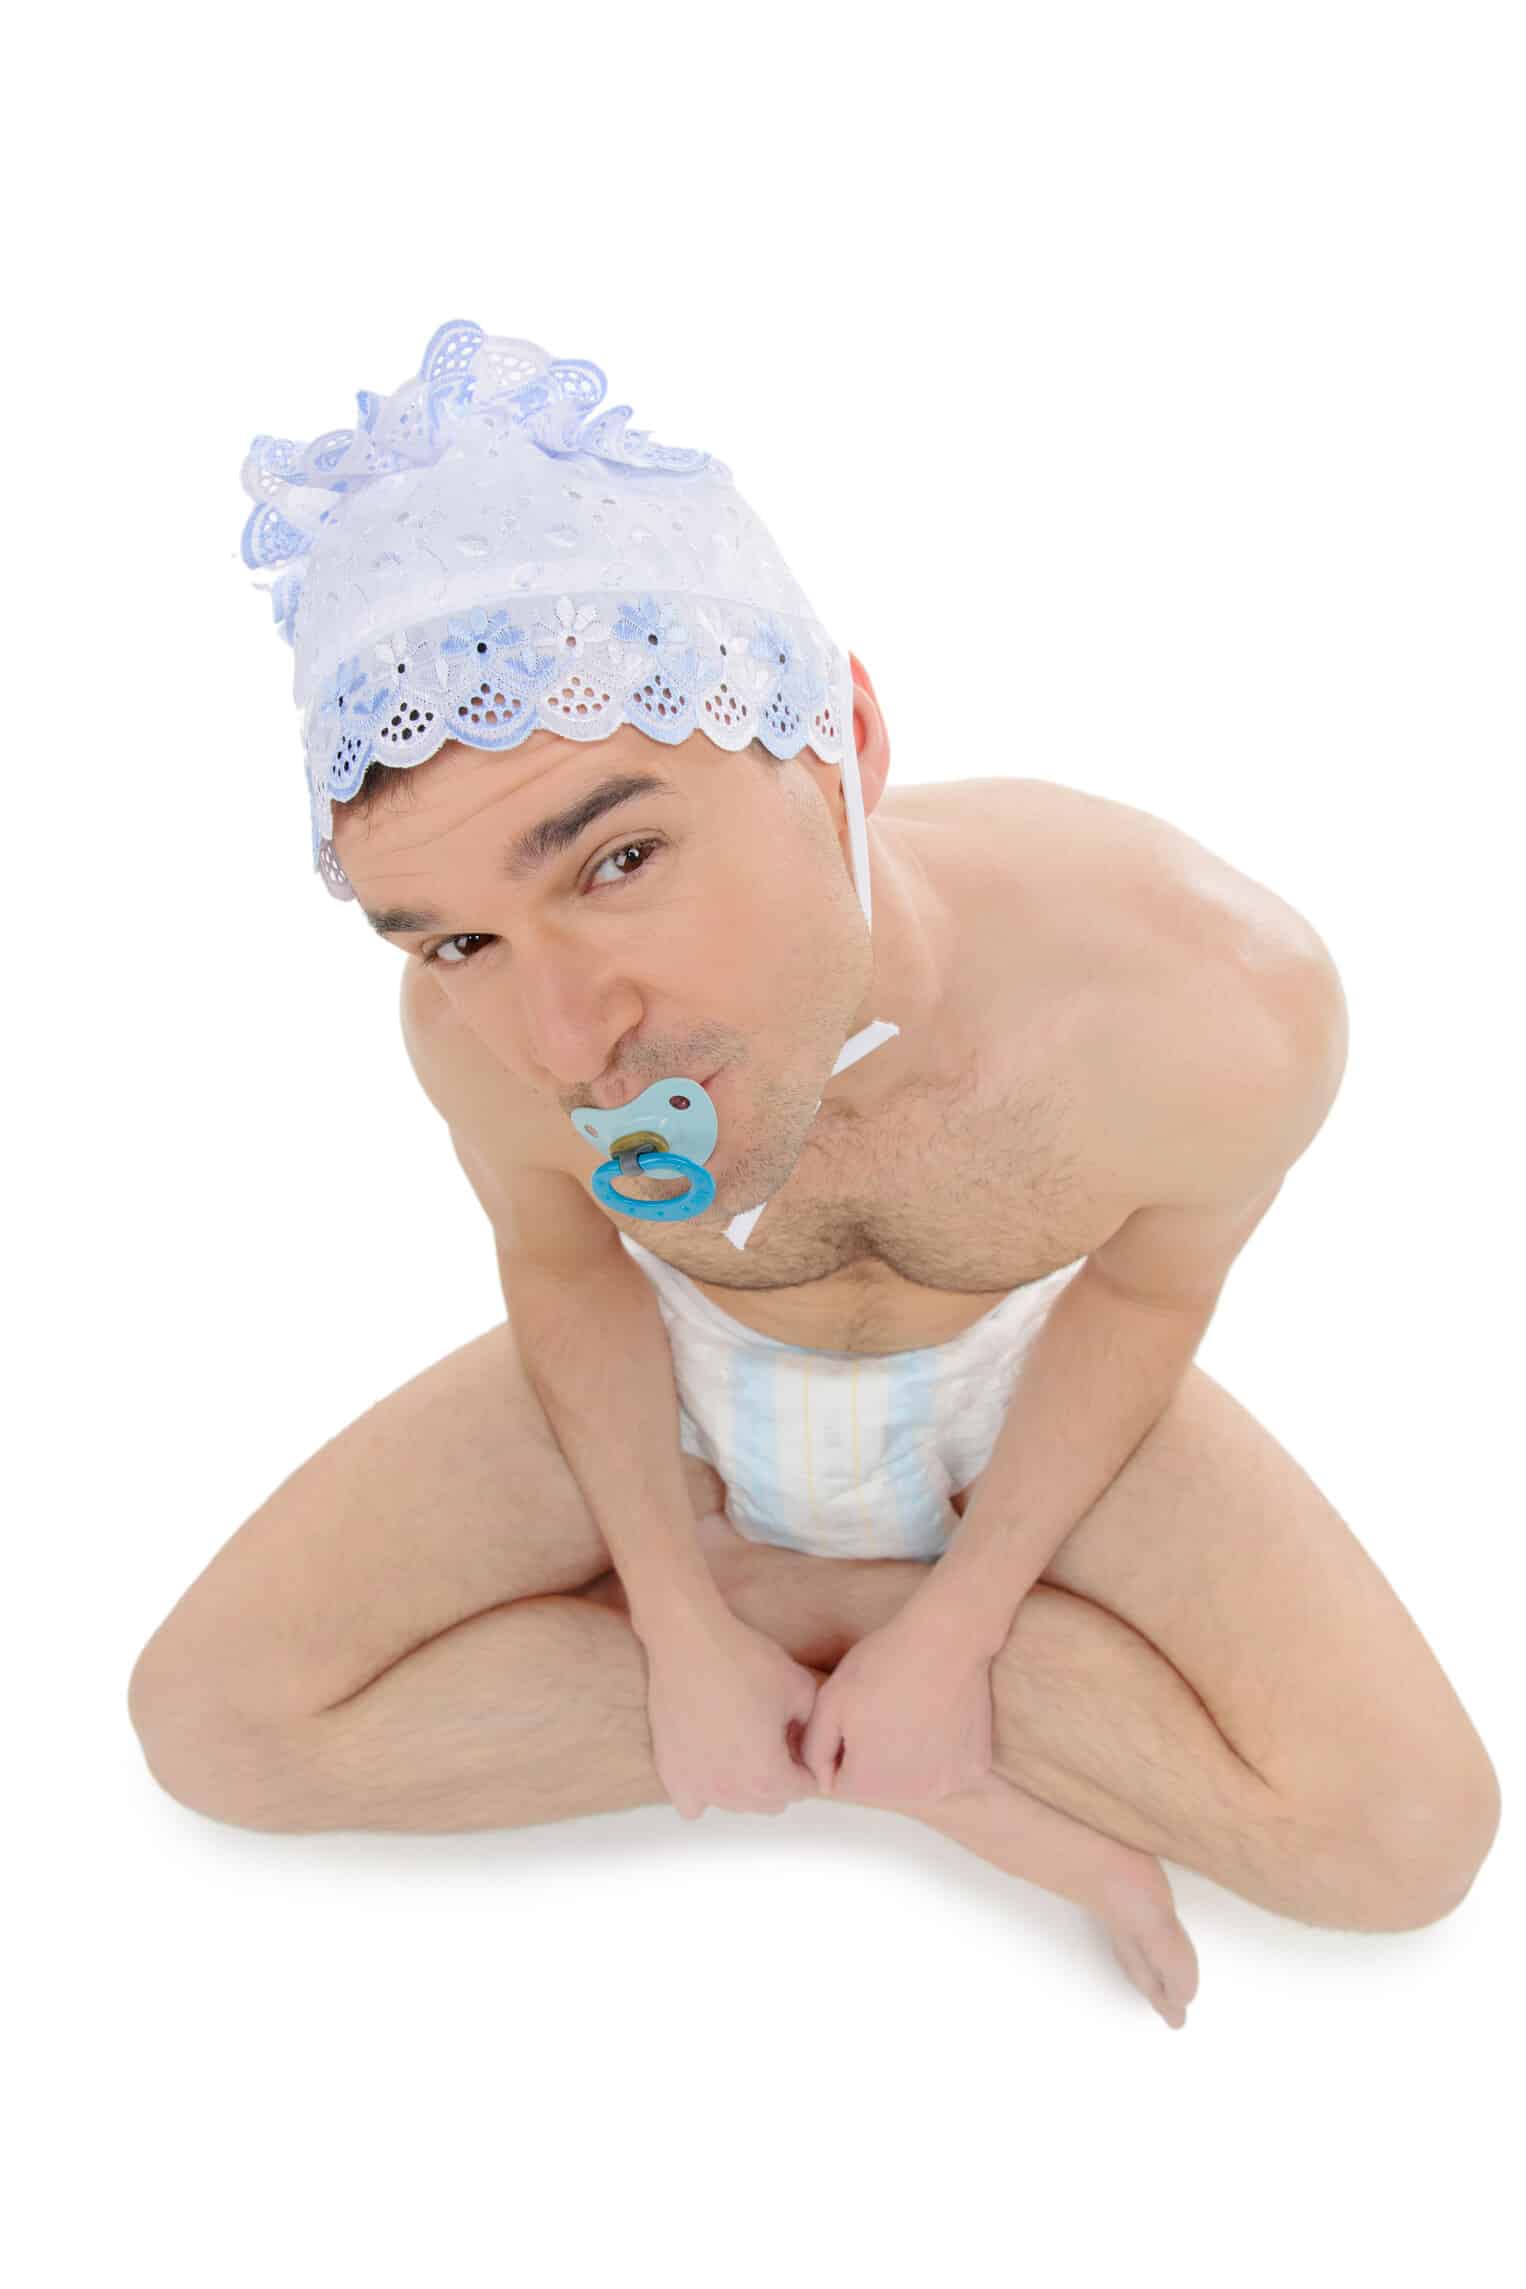 adult baby for humiliation